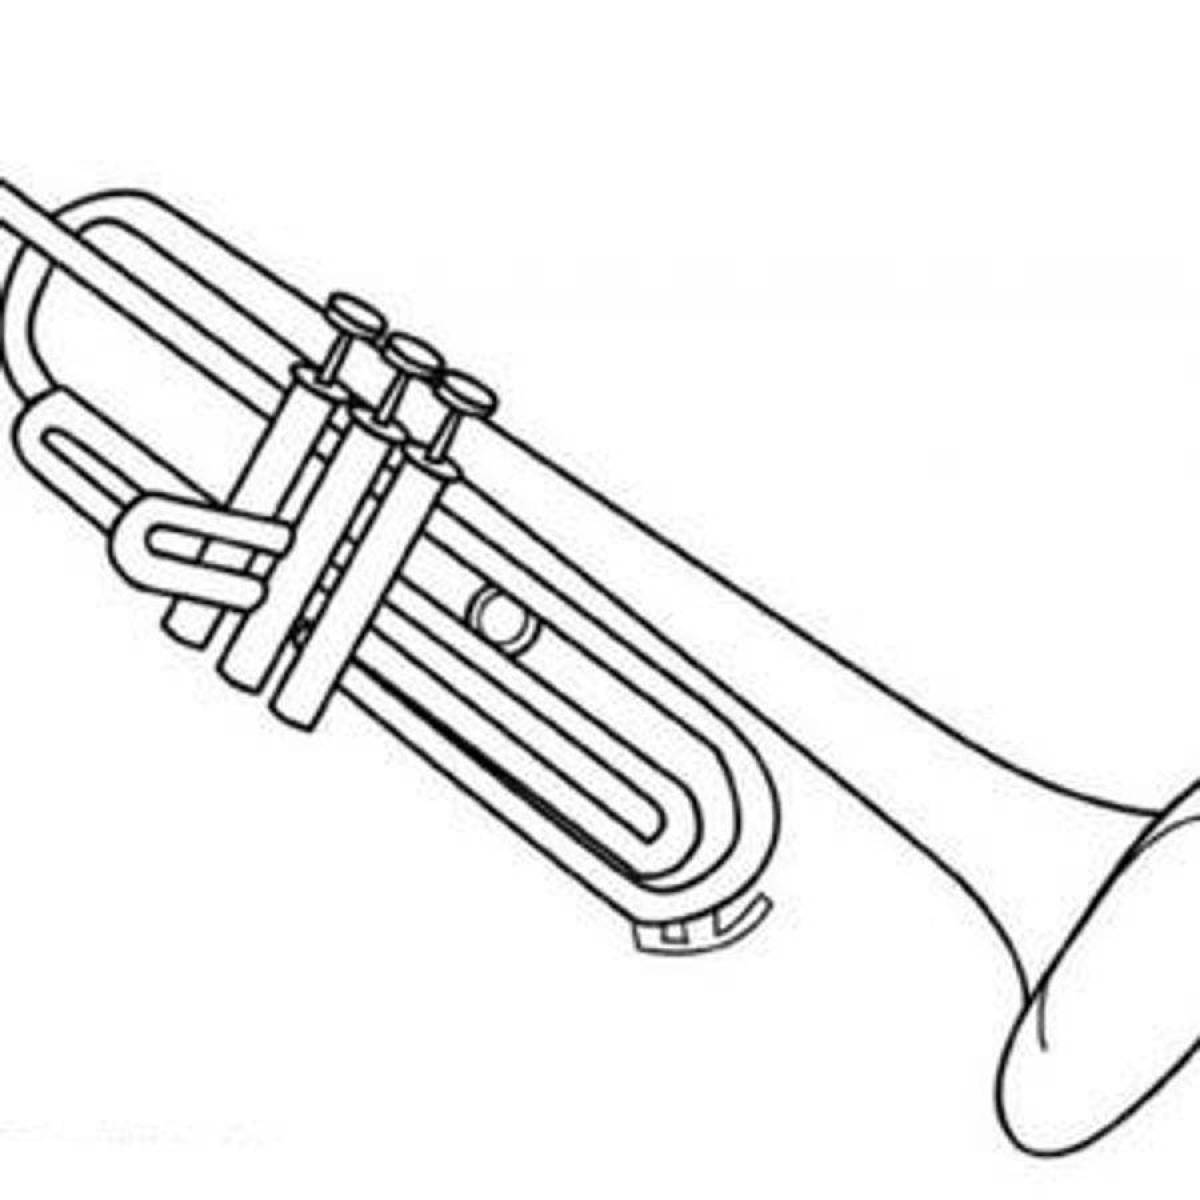 Colorful trumpet coloring page for kids